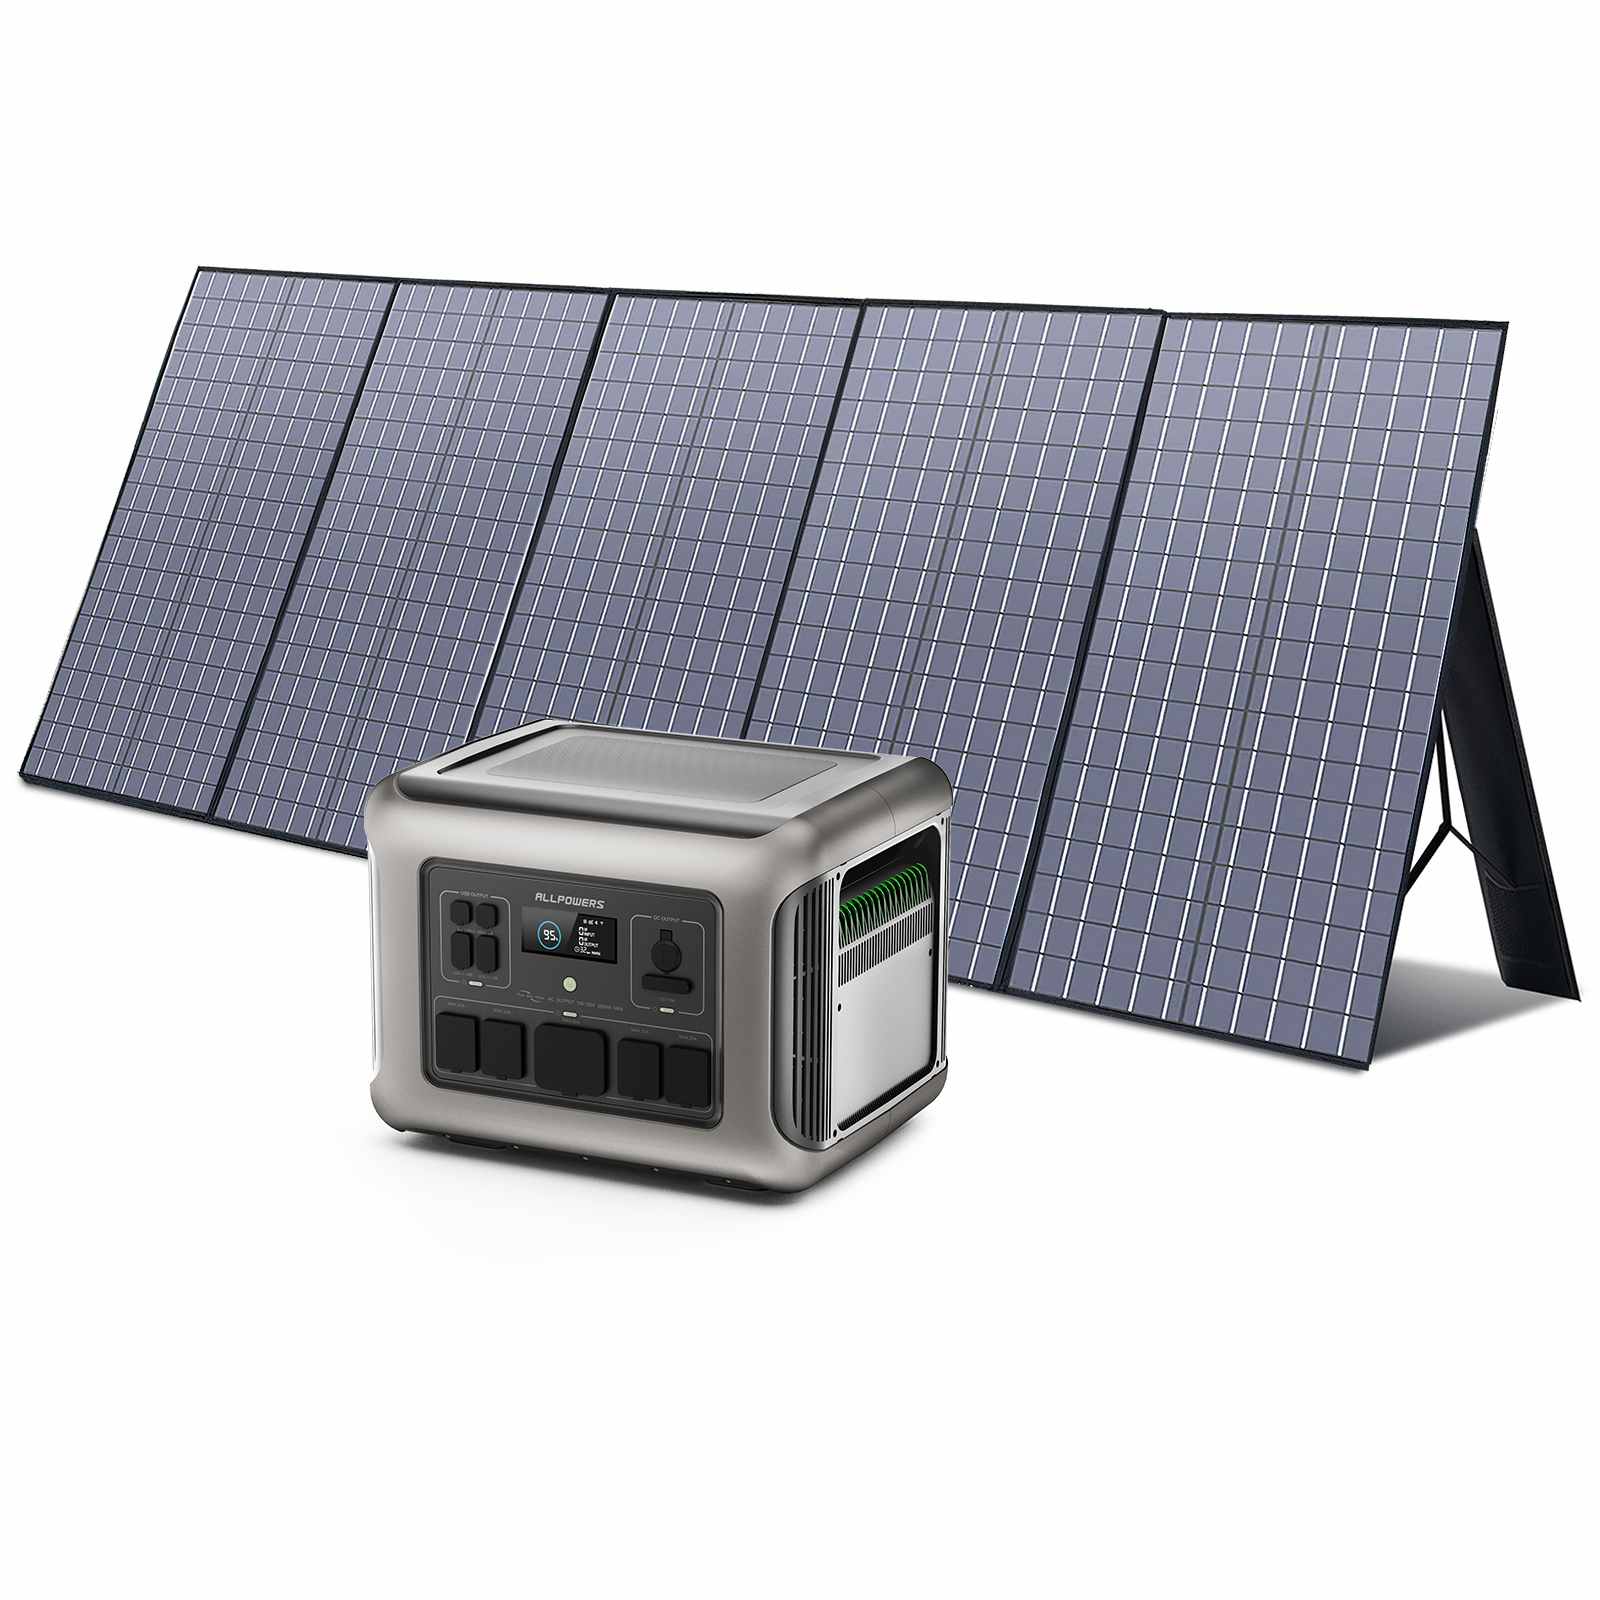 ALLPOWERS R2500 Portable Home Backup Power Station 2500W 2016W (R2500 + SP037 400W Solar Panel)